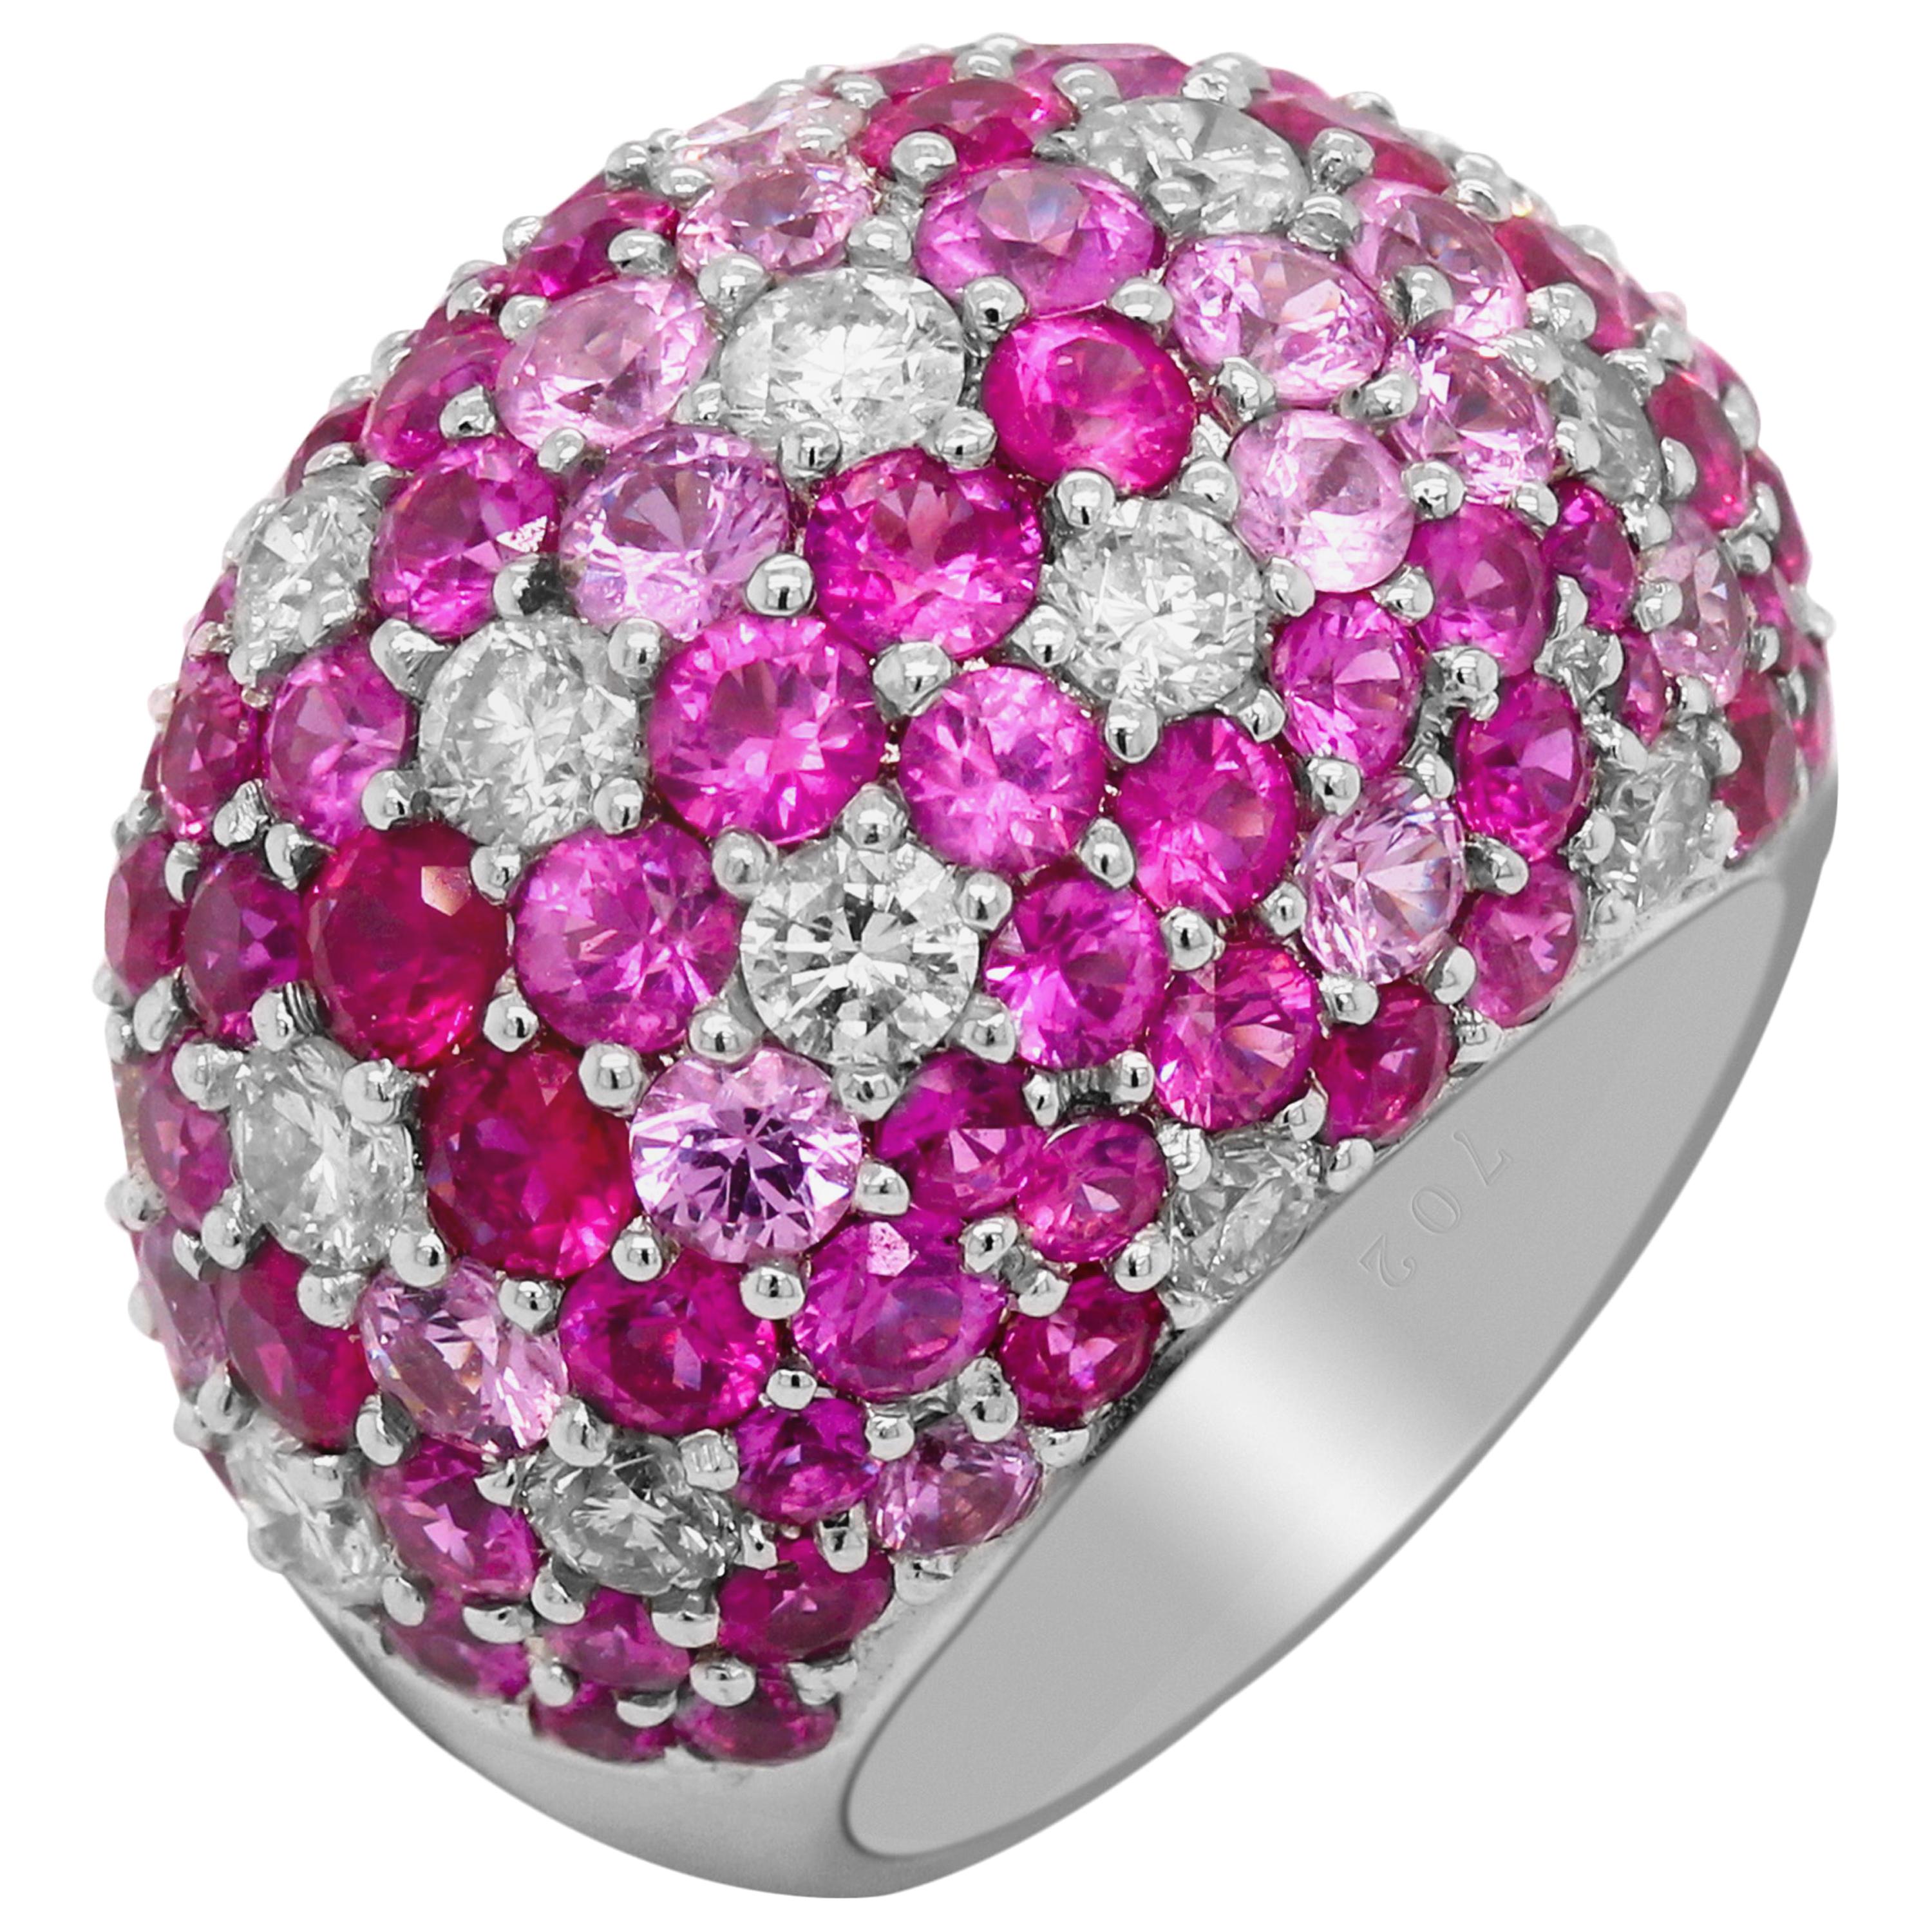 Shaded Pink Sapphires Diamonds 18 Karat White Gold Dome Ring For Sale